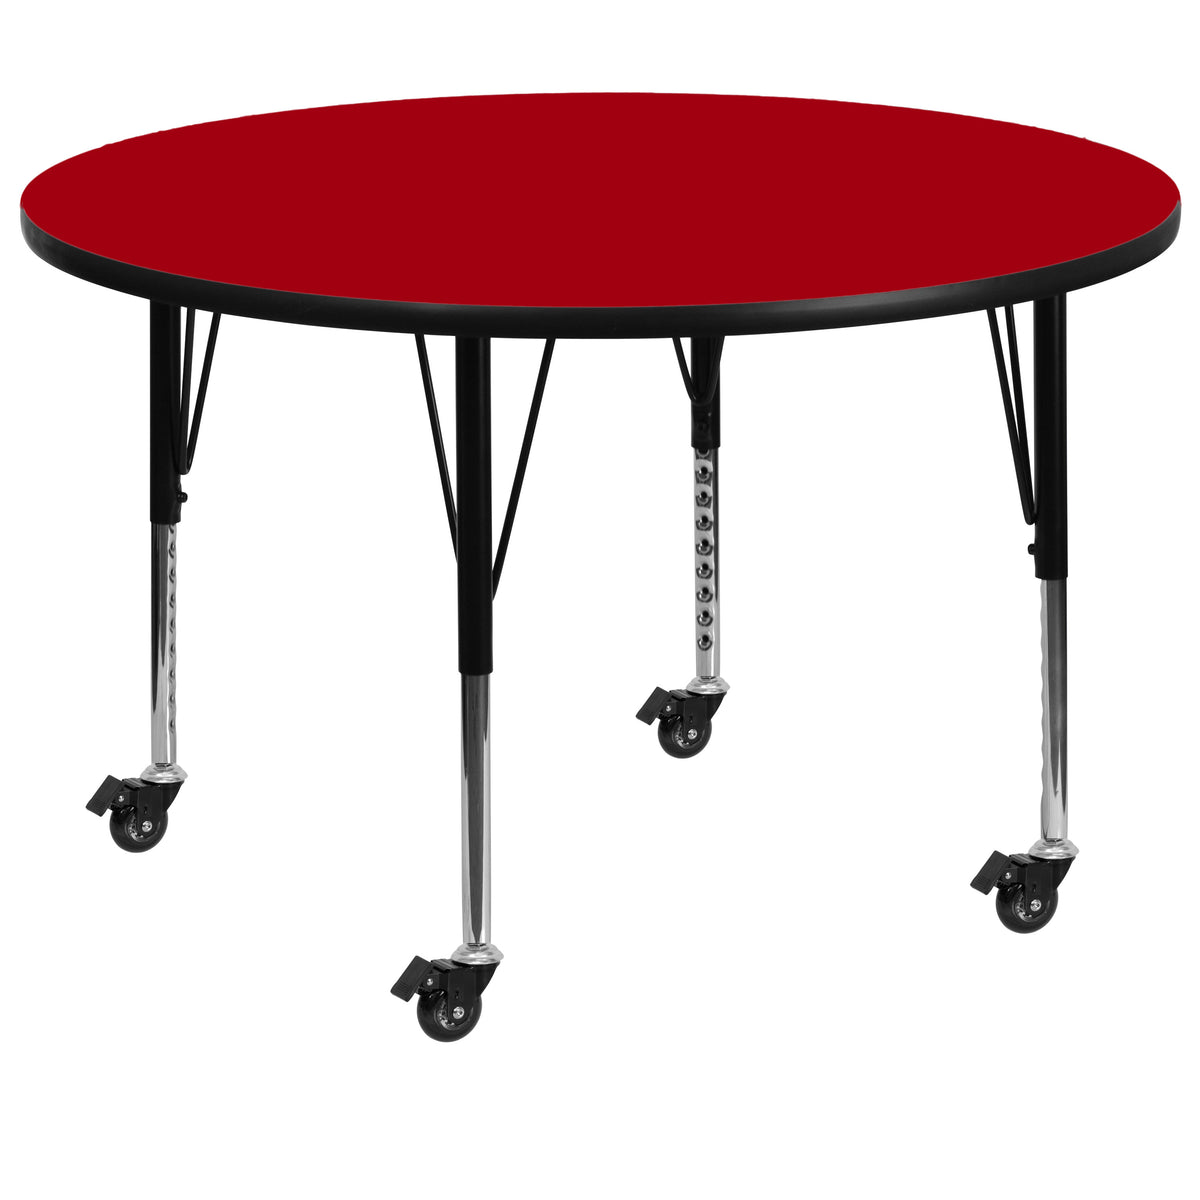 Red |#| Mobile 60inch Round Red Thermal Laminate Activity Table - Height Adjustable Legs